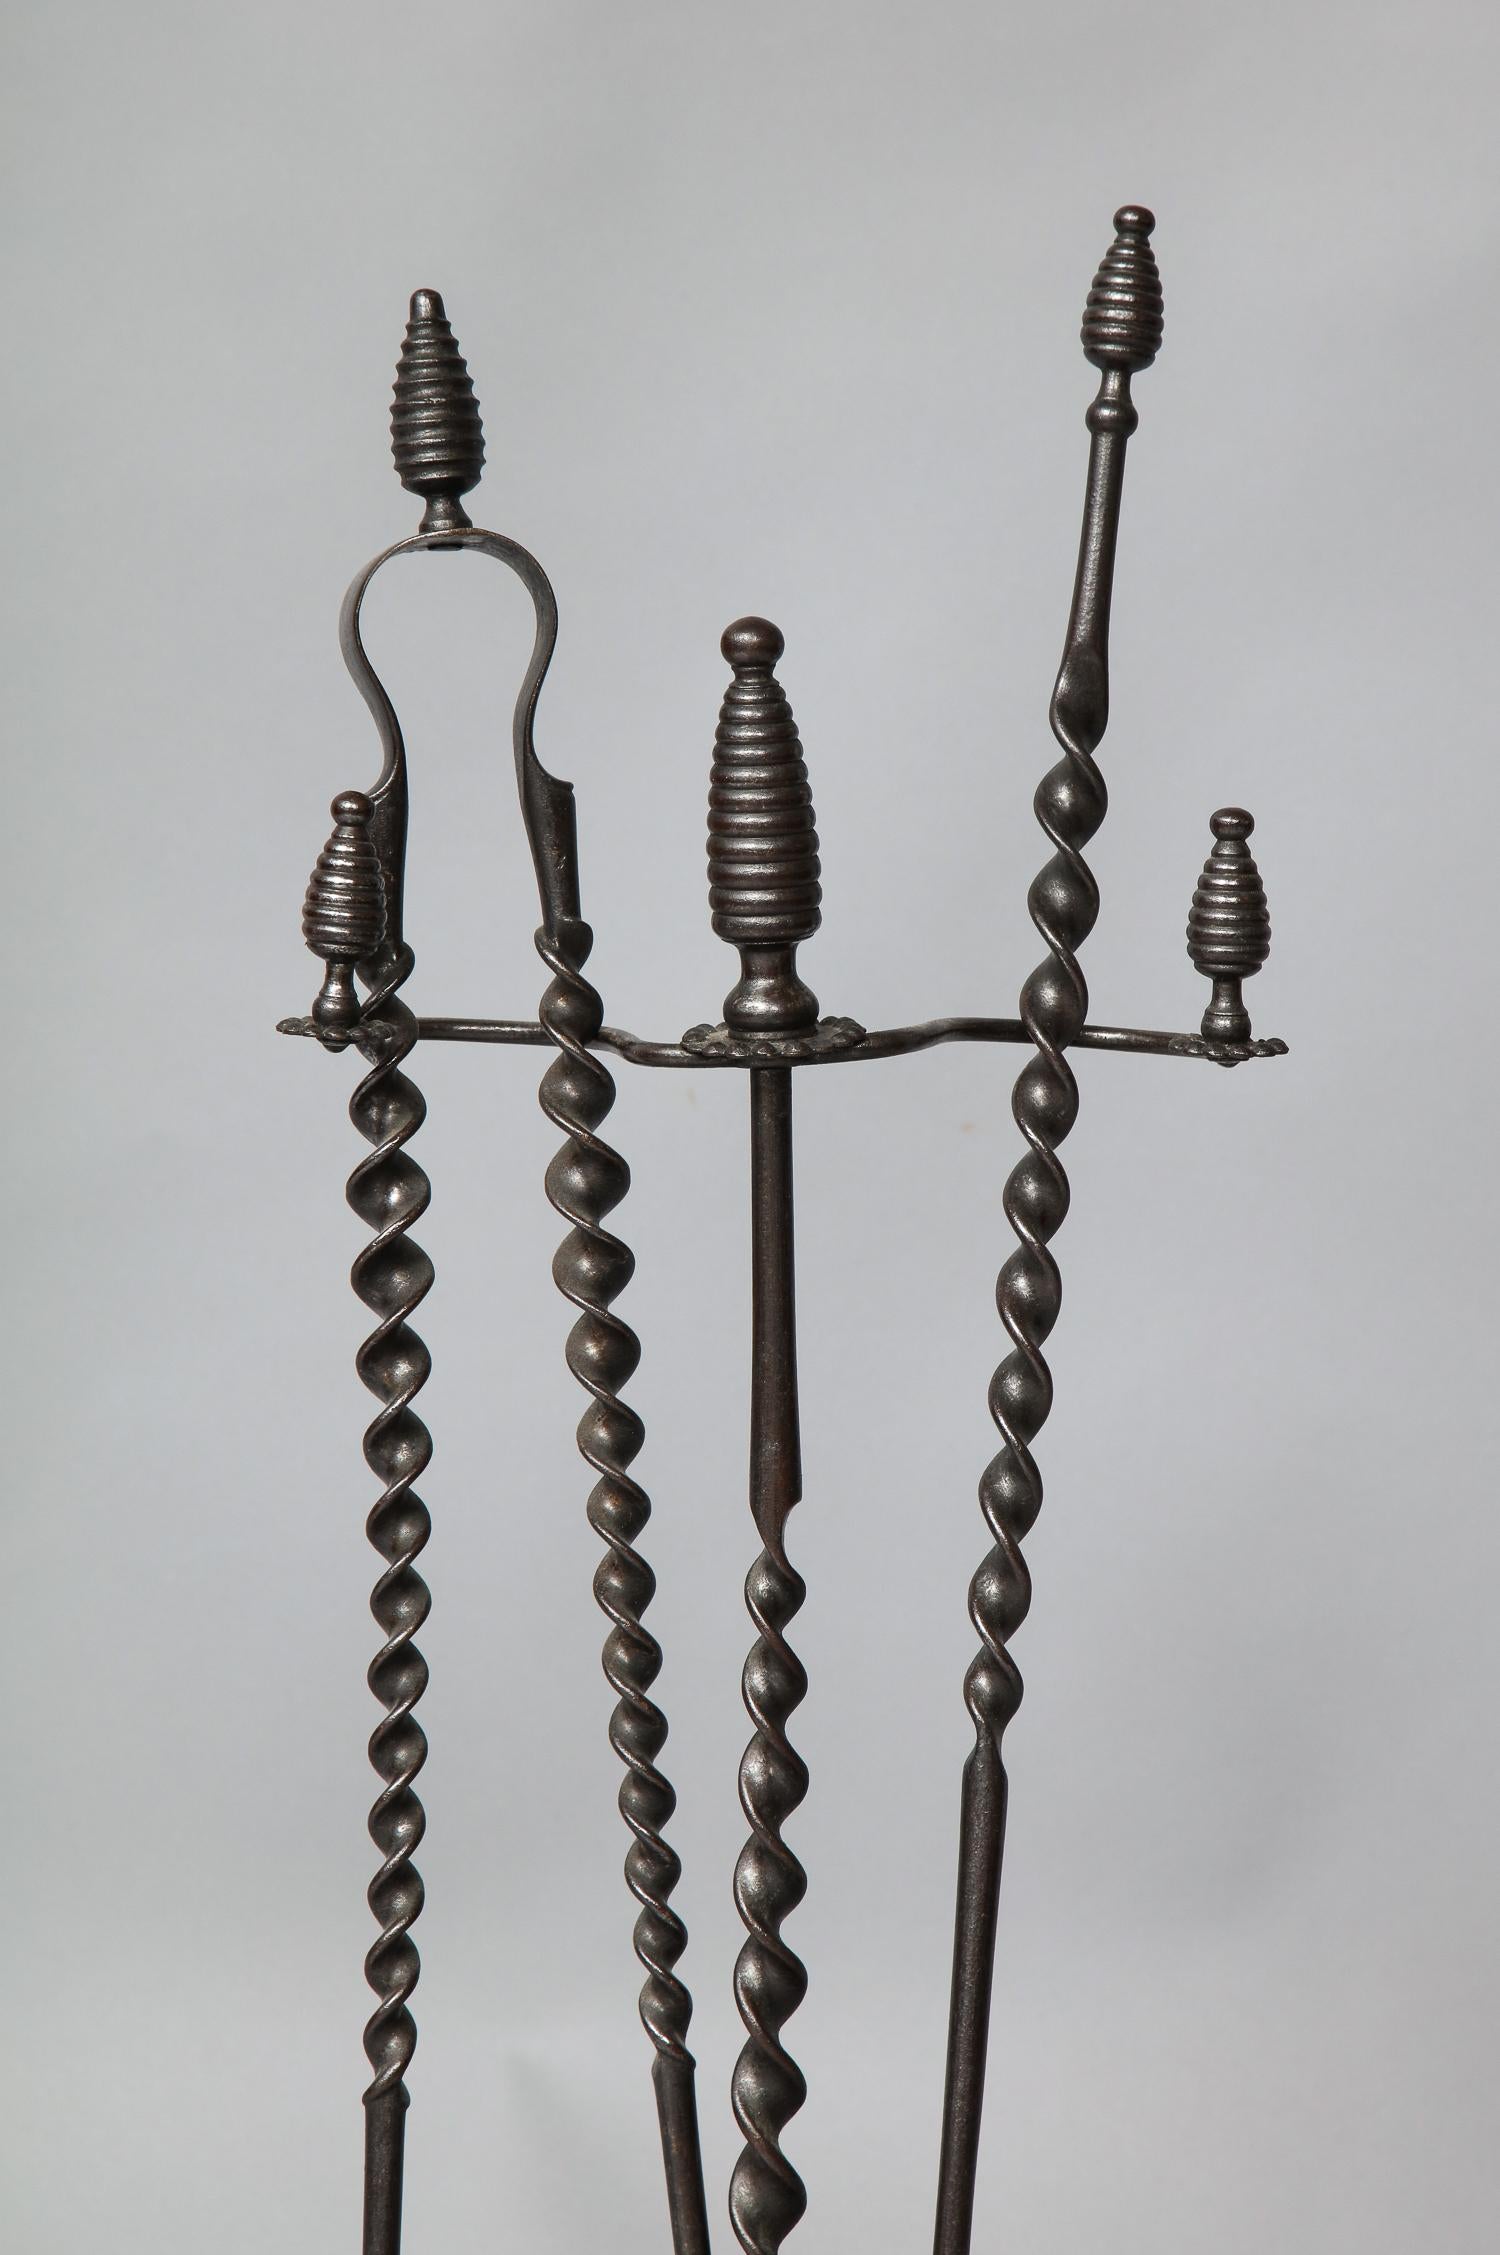 A pair of Arts & Crafts firetools, shovel and tongs, in gunmetal steel with spiral shafts with beehive finials with matching Stand and oval drip tray with raised rim. English, late 19th century.